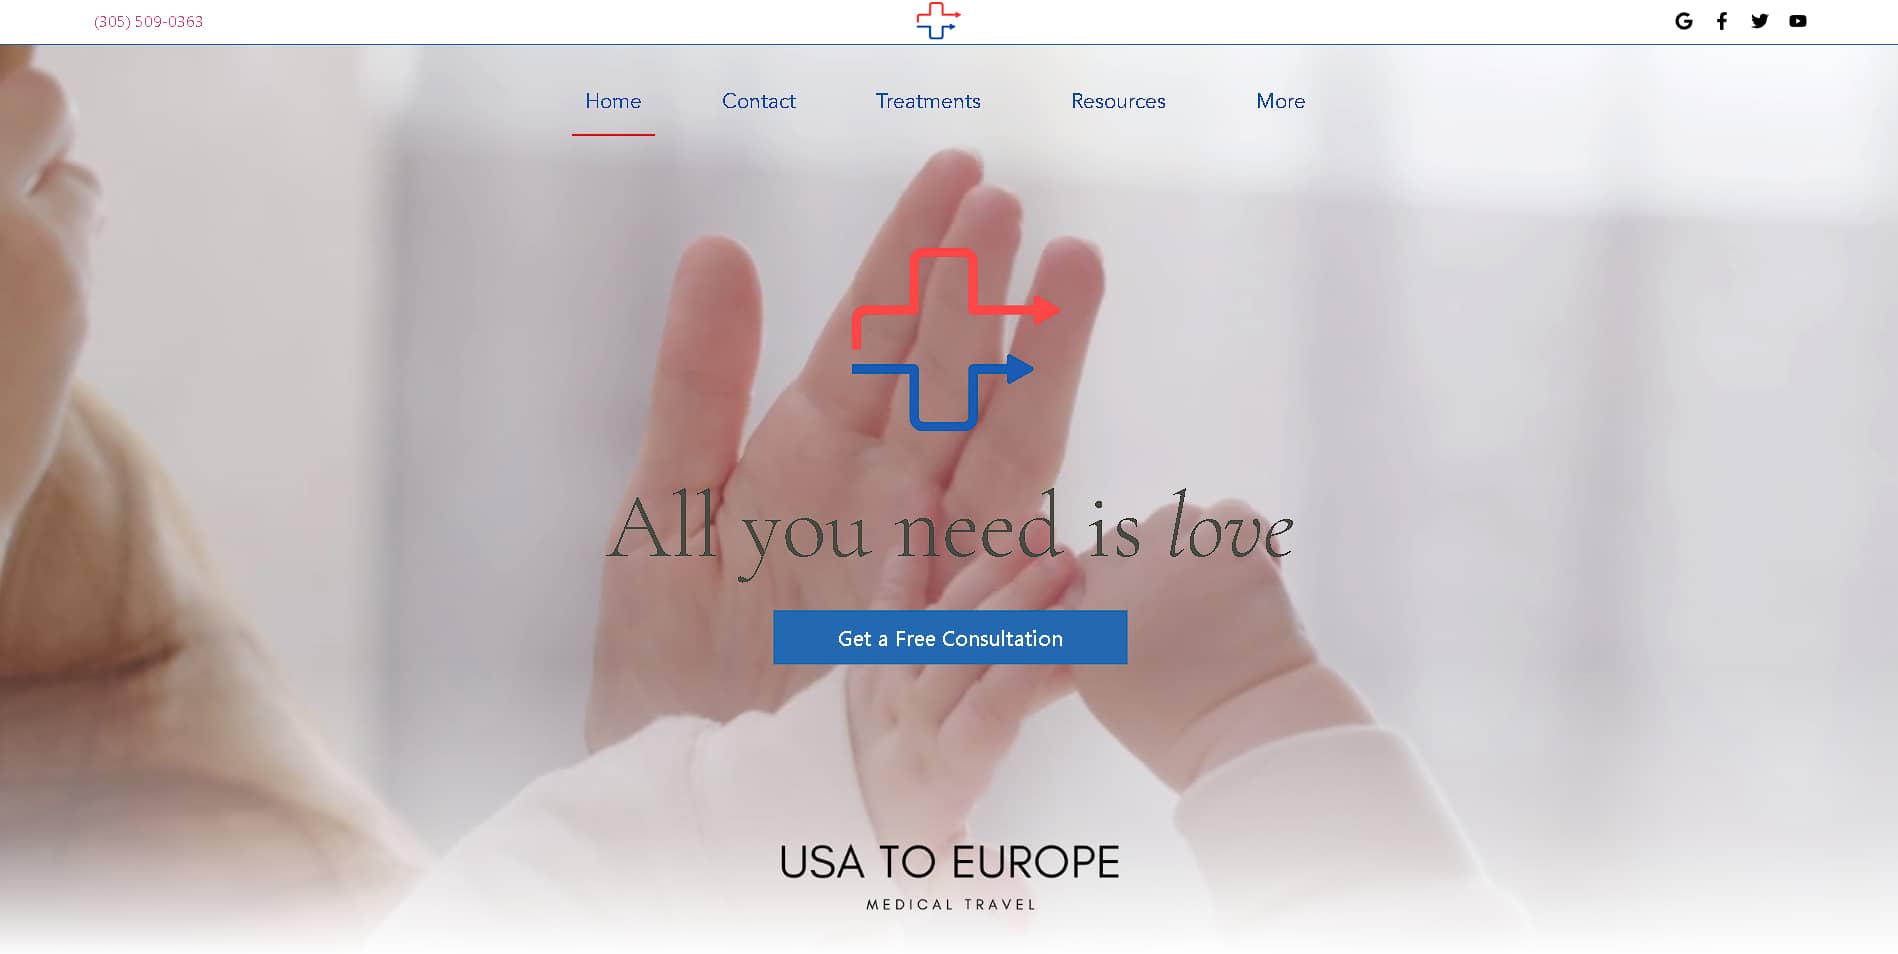 WordPress Website Design example for USA To Europe Medical Travel company in Miami